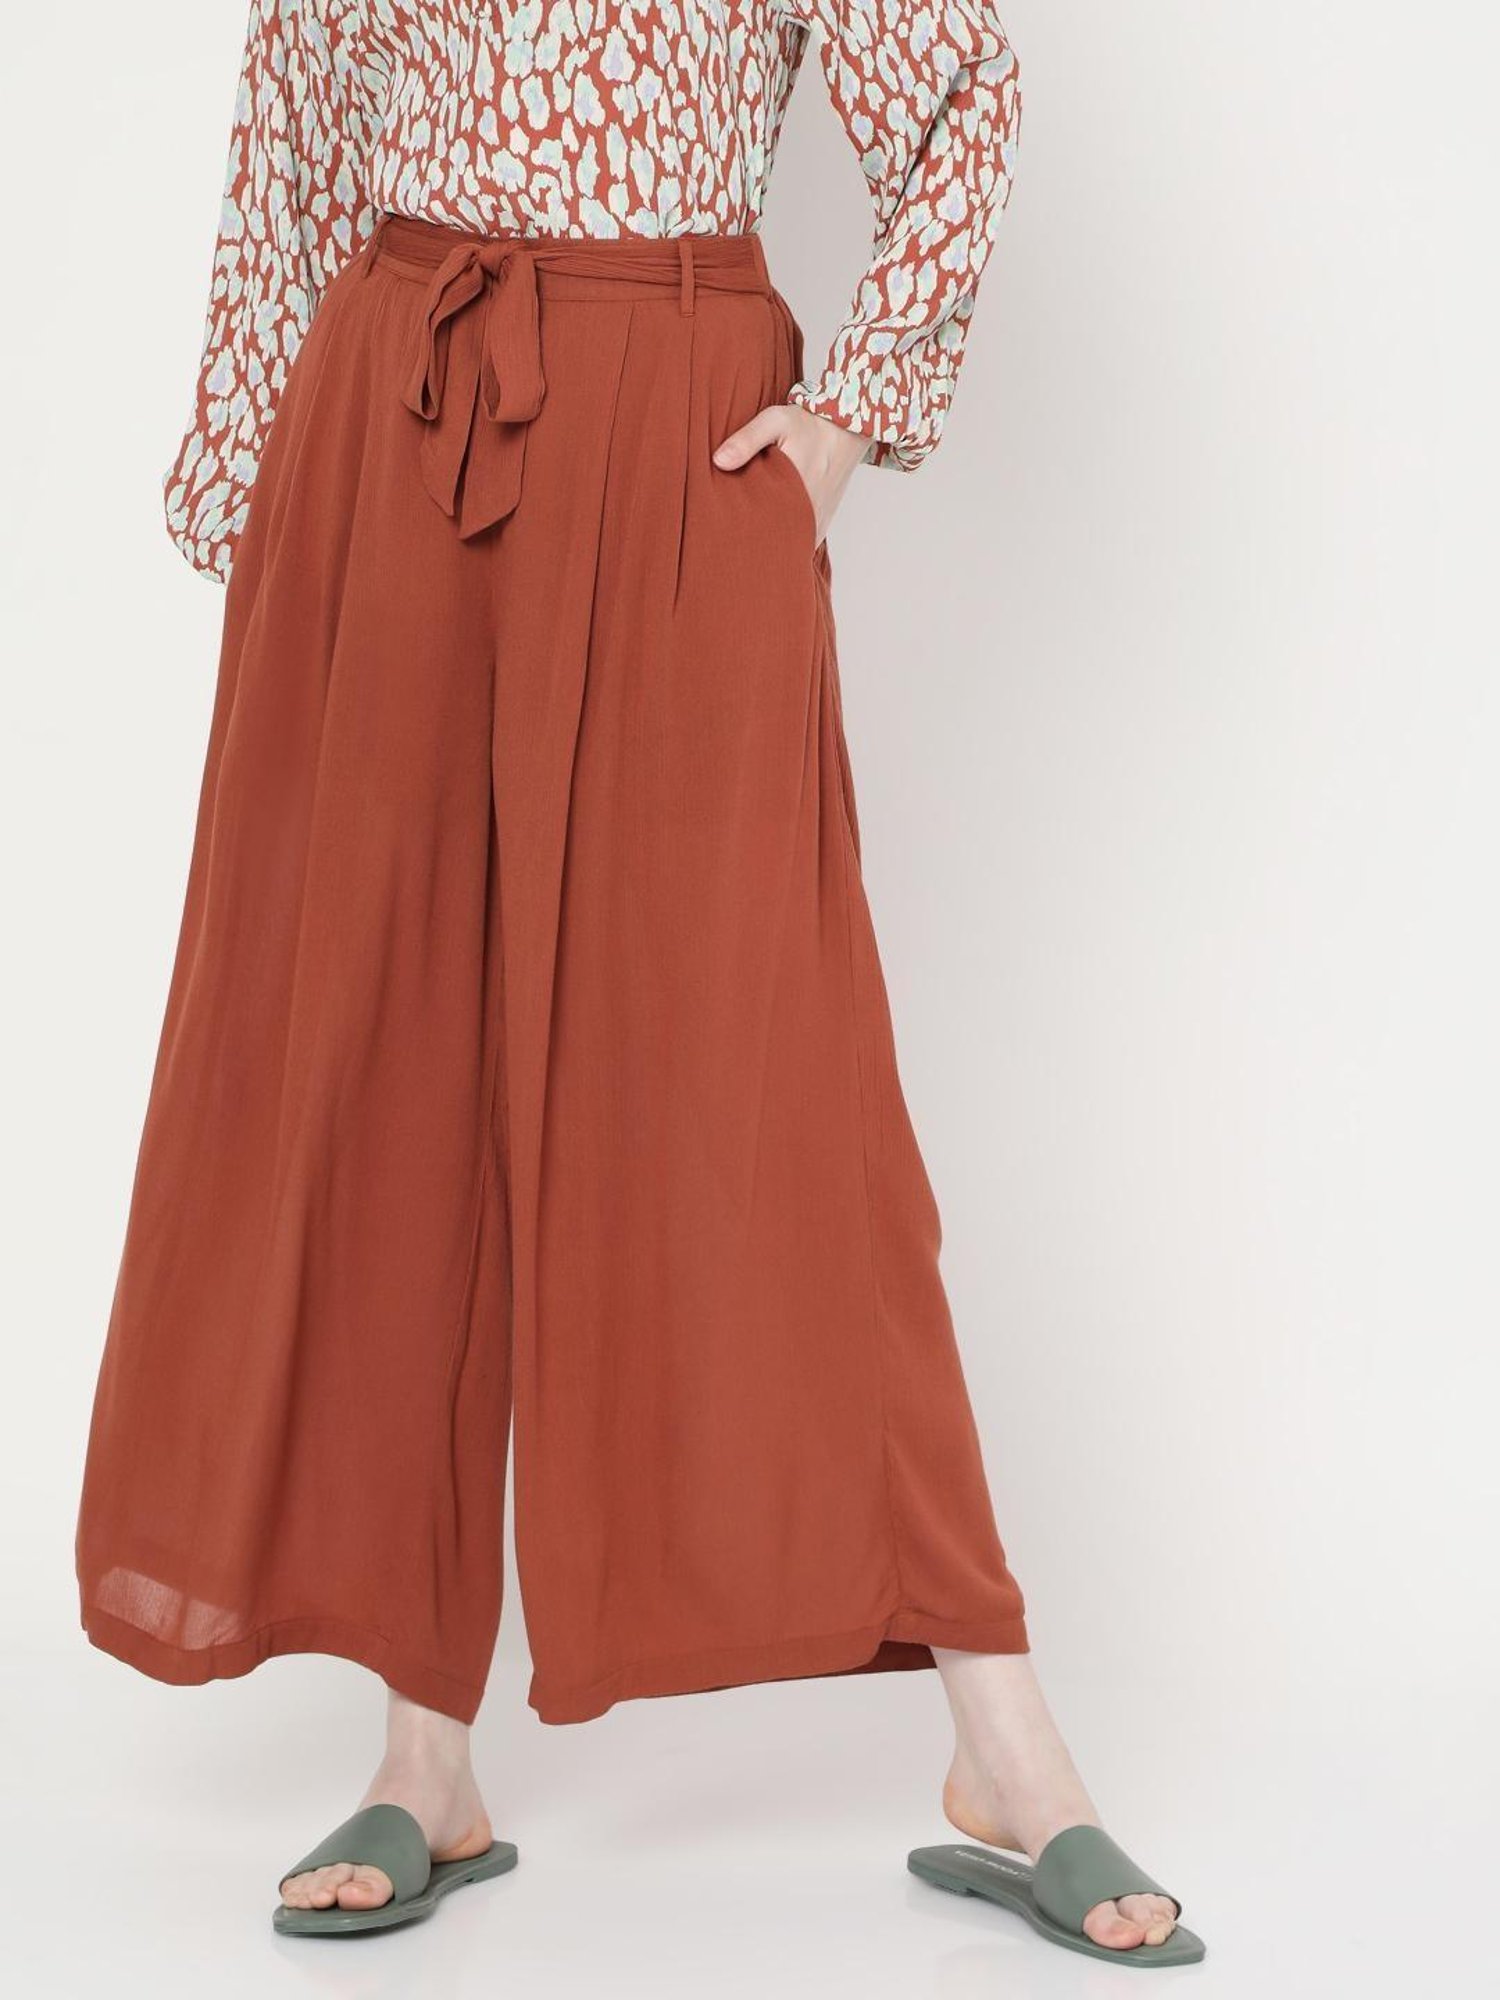 Wide Legged Cropped Pants Gaucho Pants Rust Color Velour  Etsy